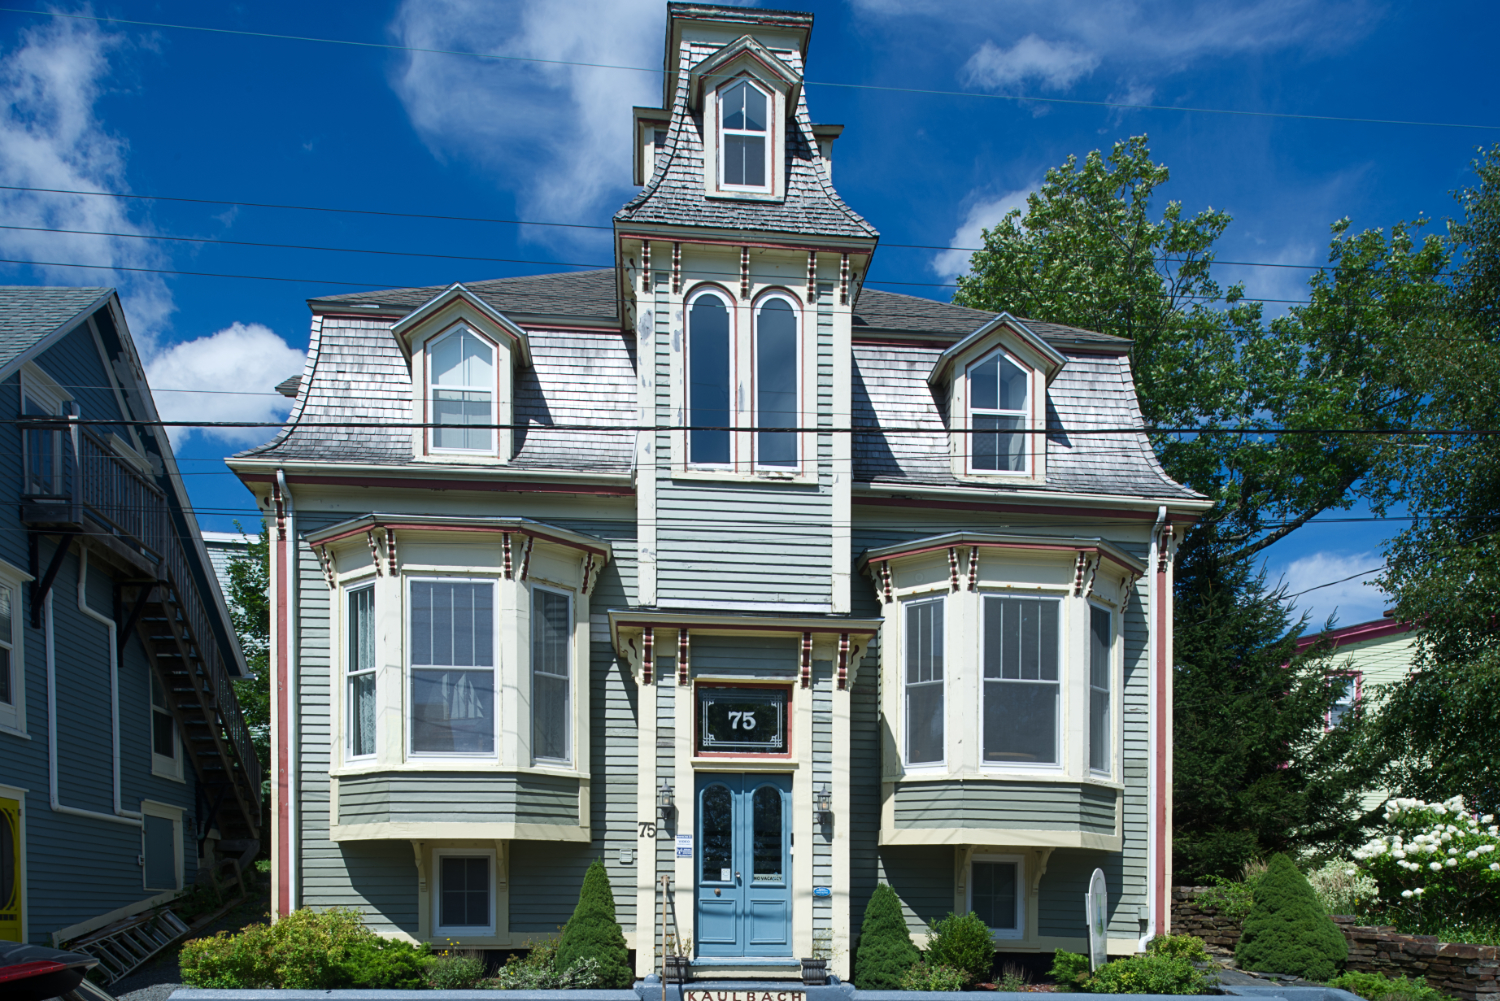 An ornate Victorian wooden building on a street in Lunenburg.